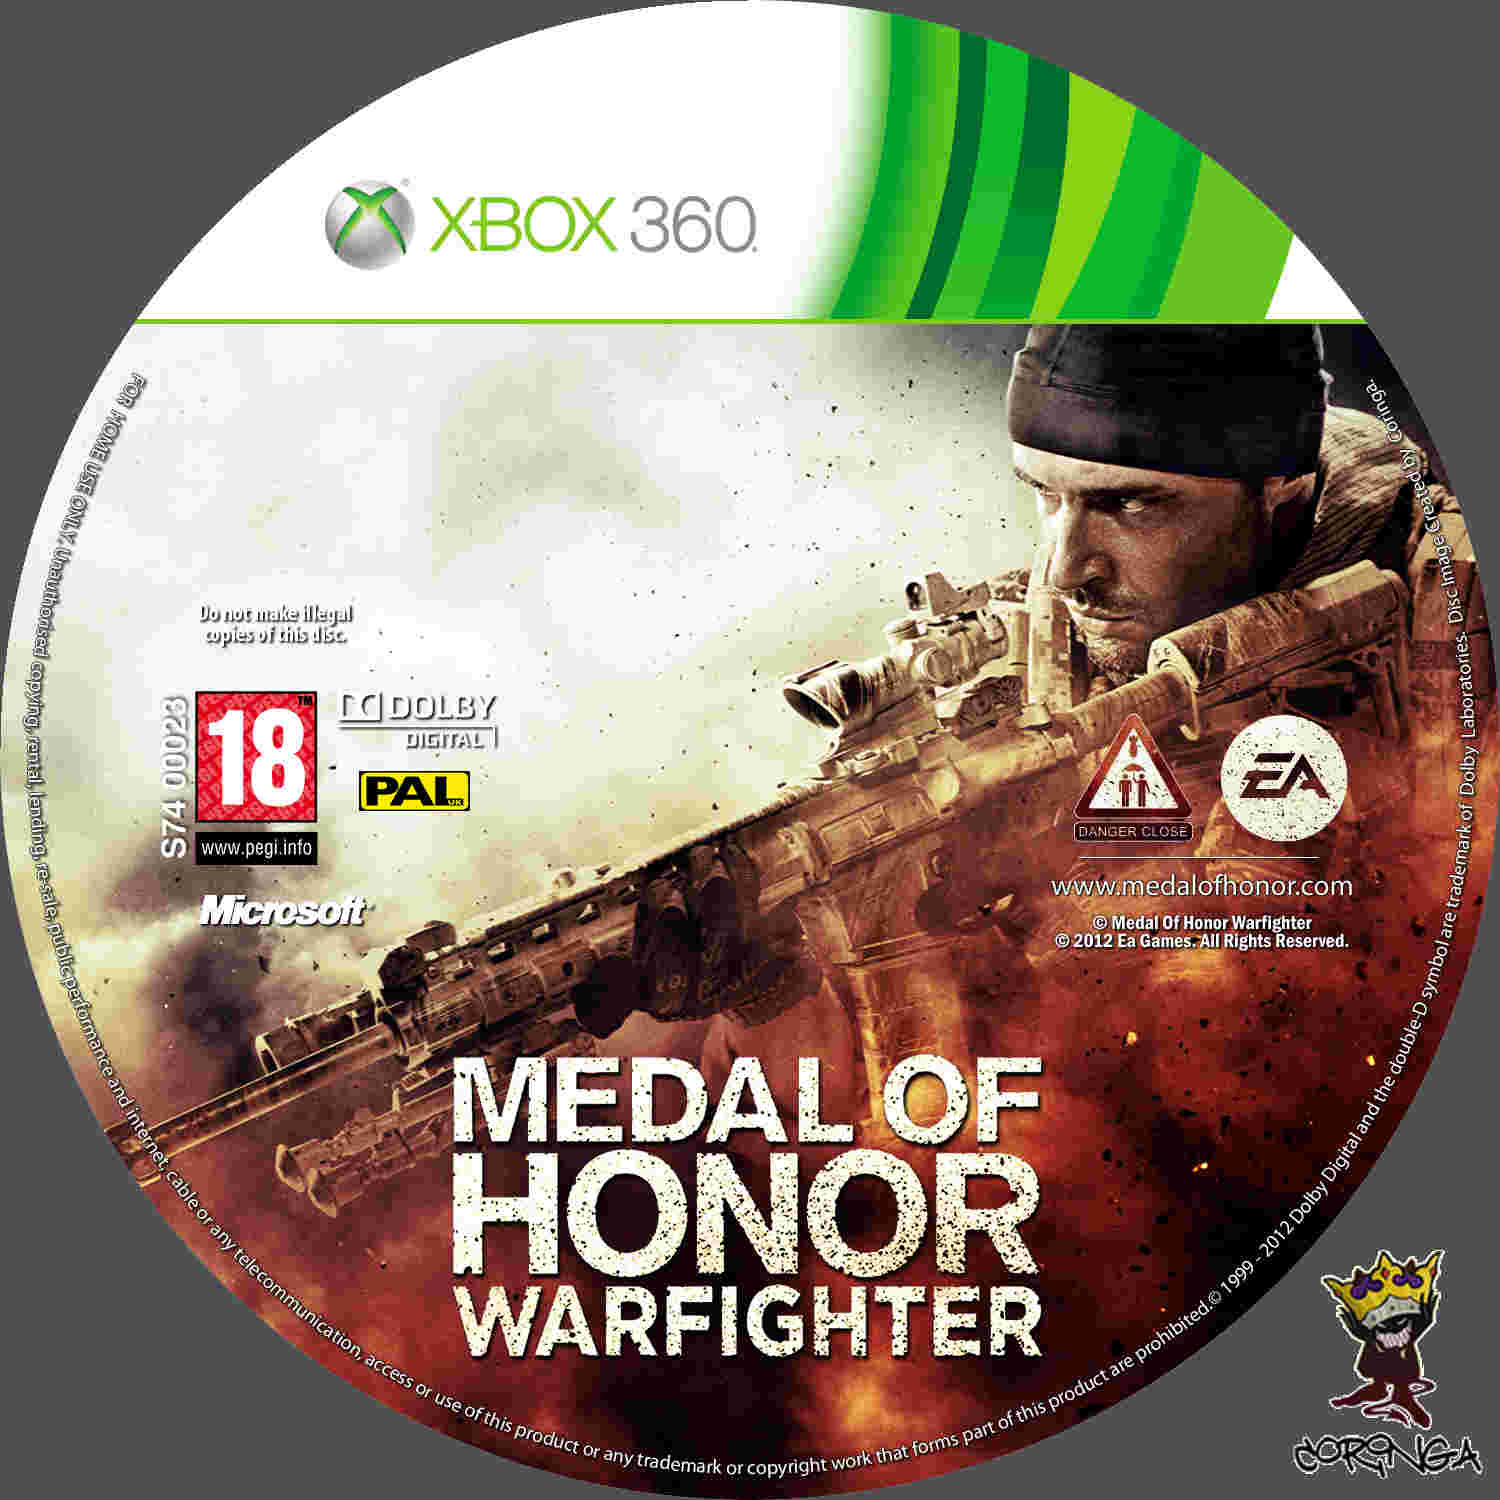 Medal of honor читы. Medal of Honor Xbox 360 обложка. Medal of Honor ps3 обложка. Medal of Honor Warfighter Xbox 360. Xbox 360 обложка диска Medal of Honor Warfighter.